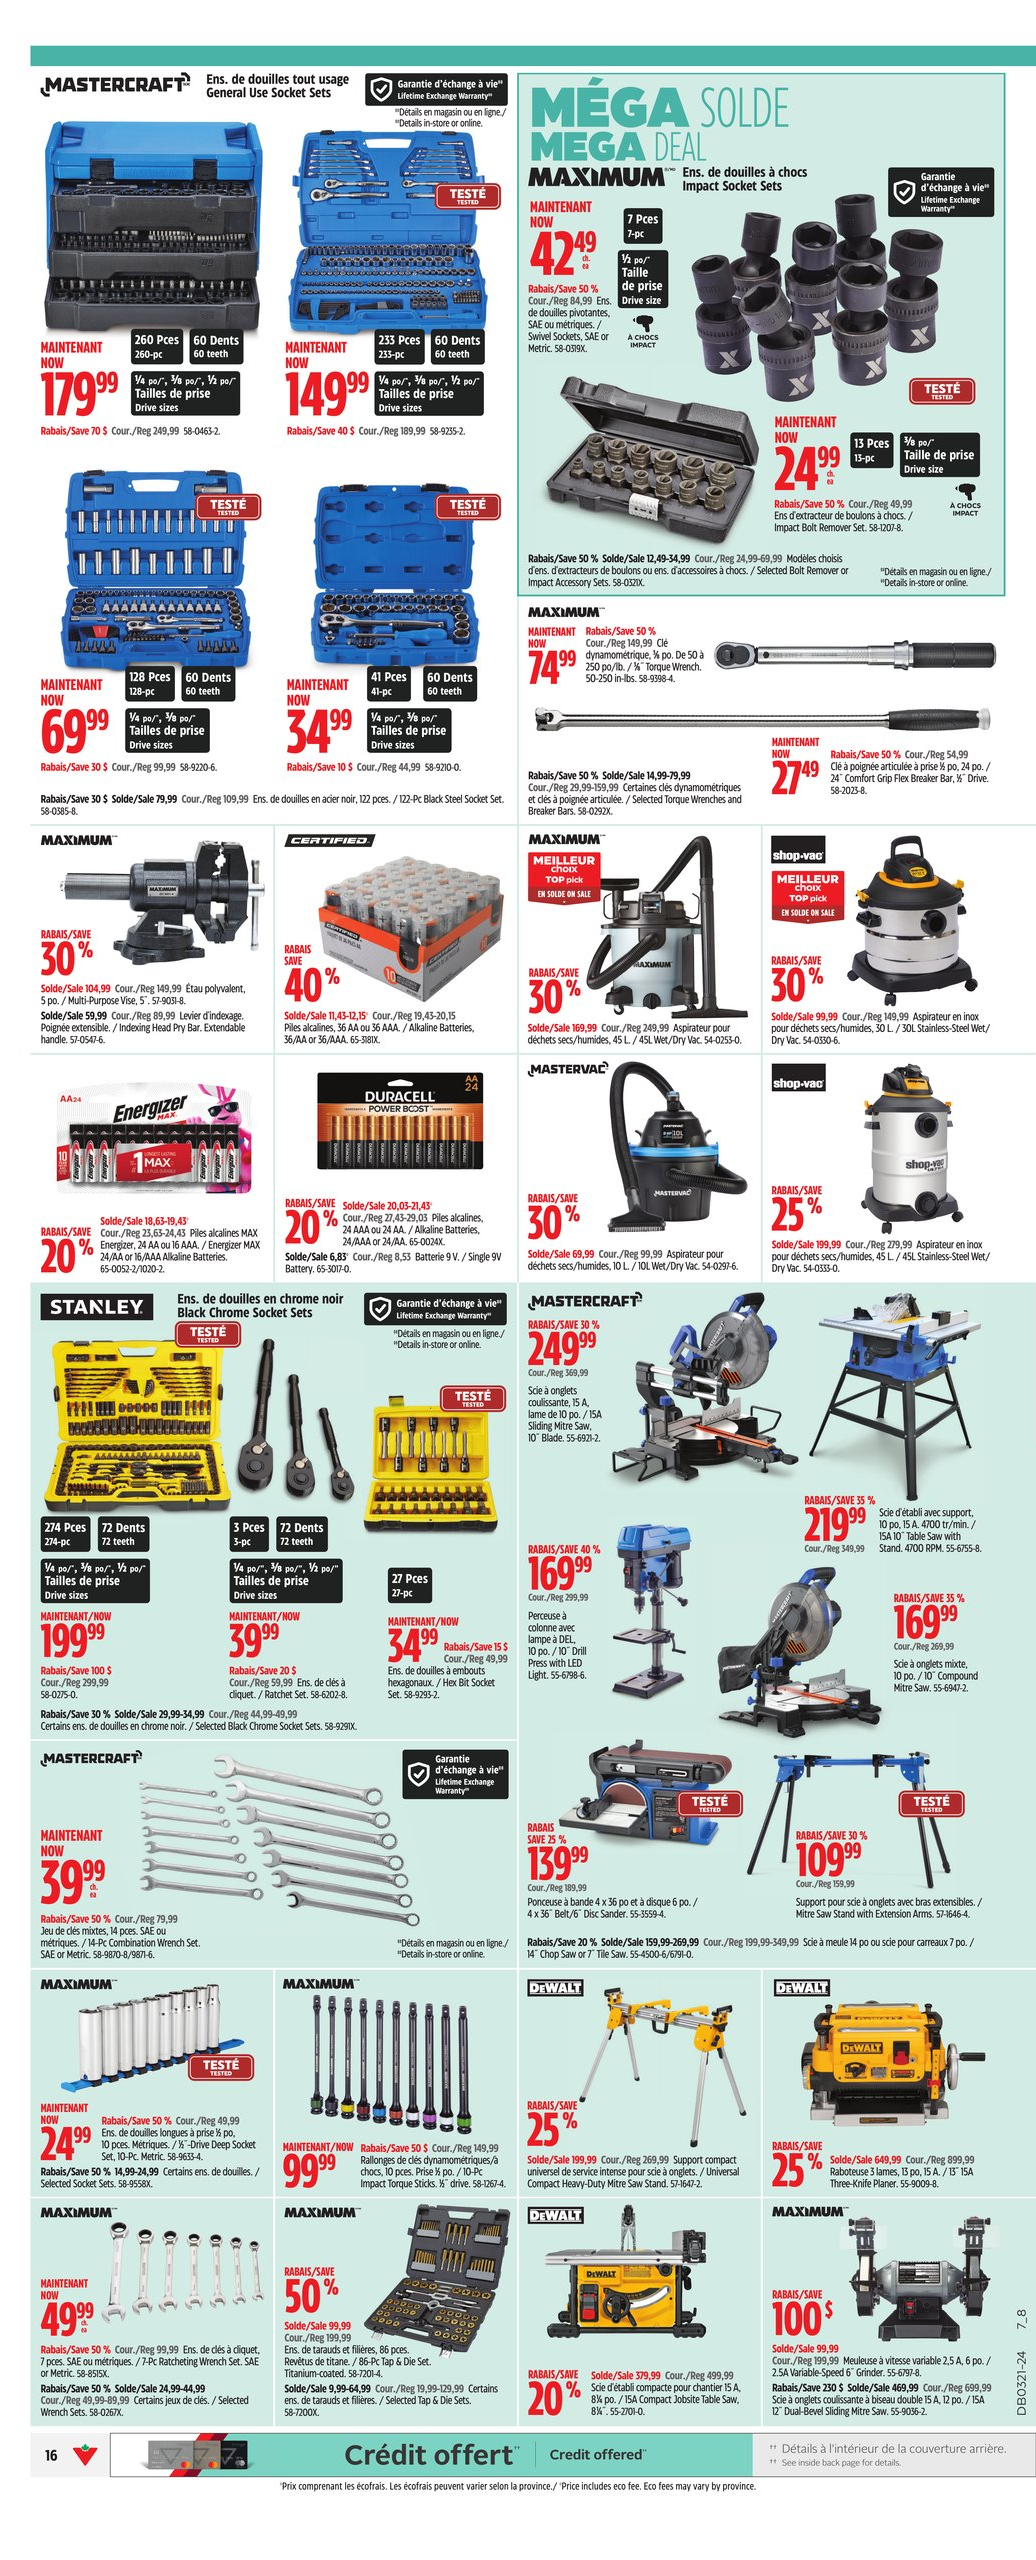 Circulaire Canadian Tire - Page 21